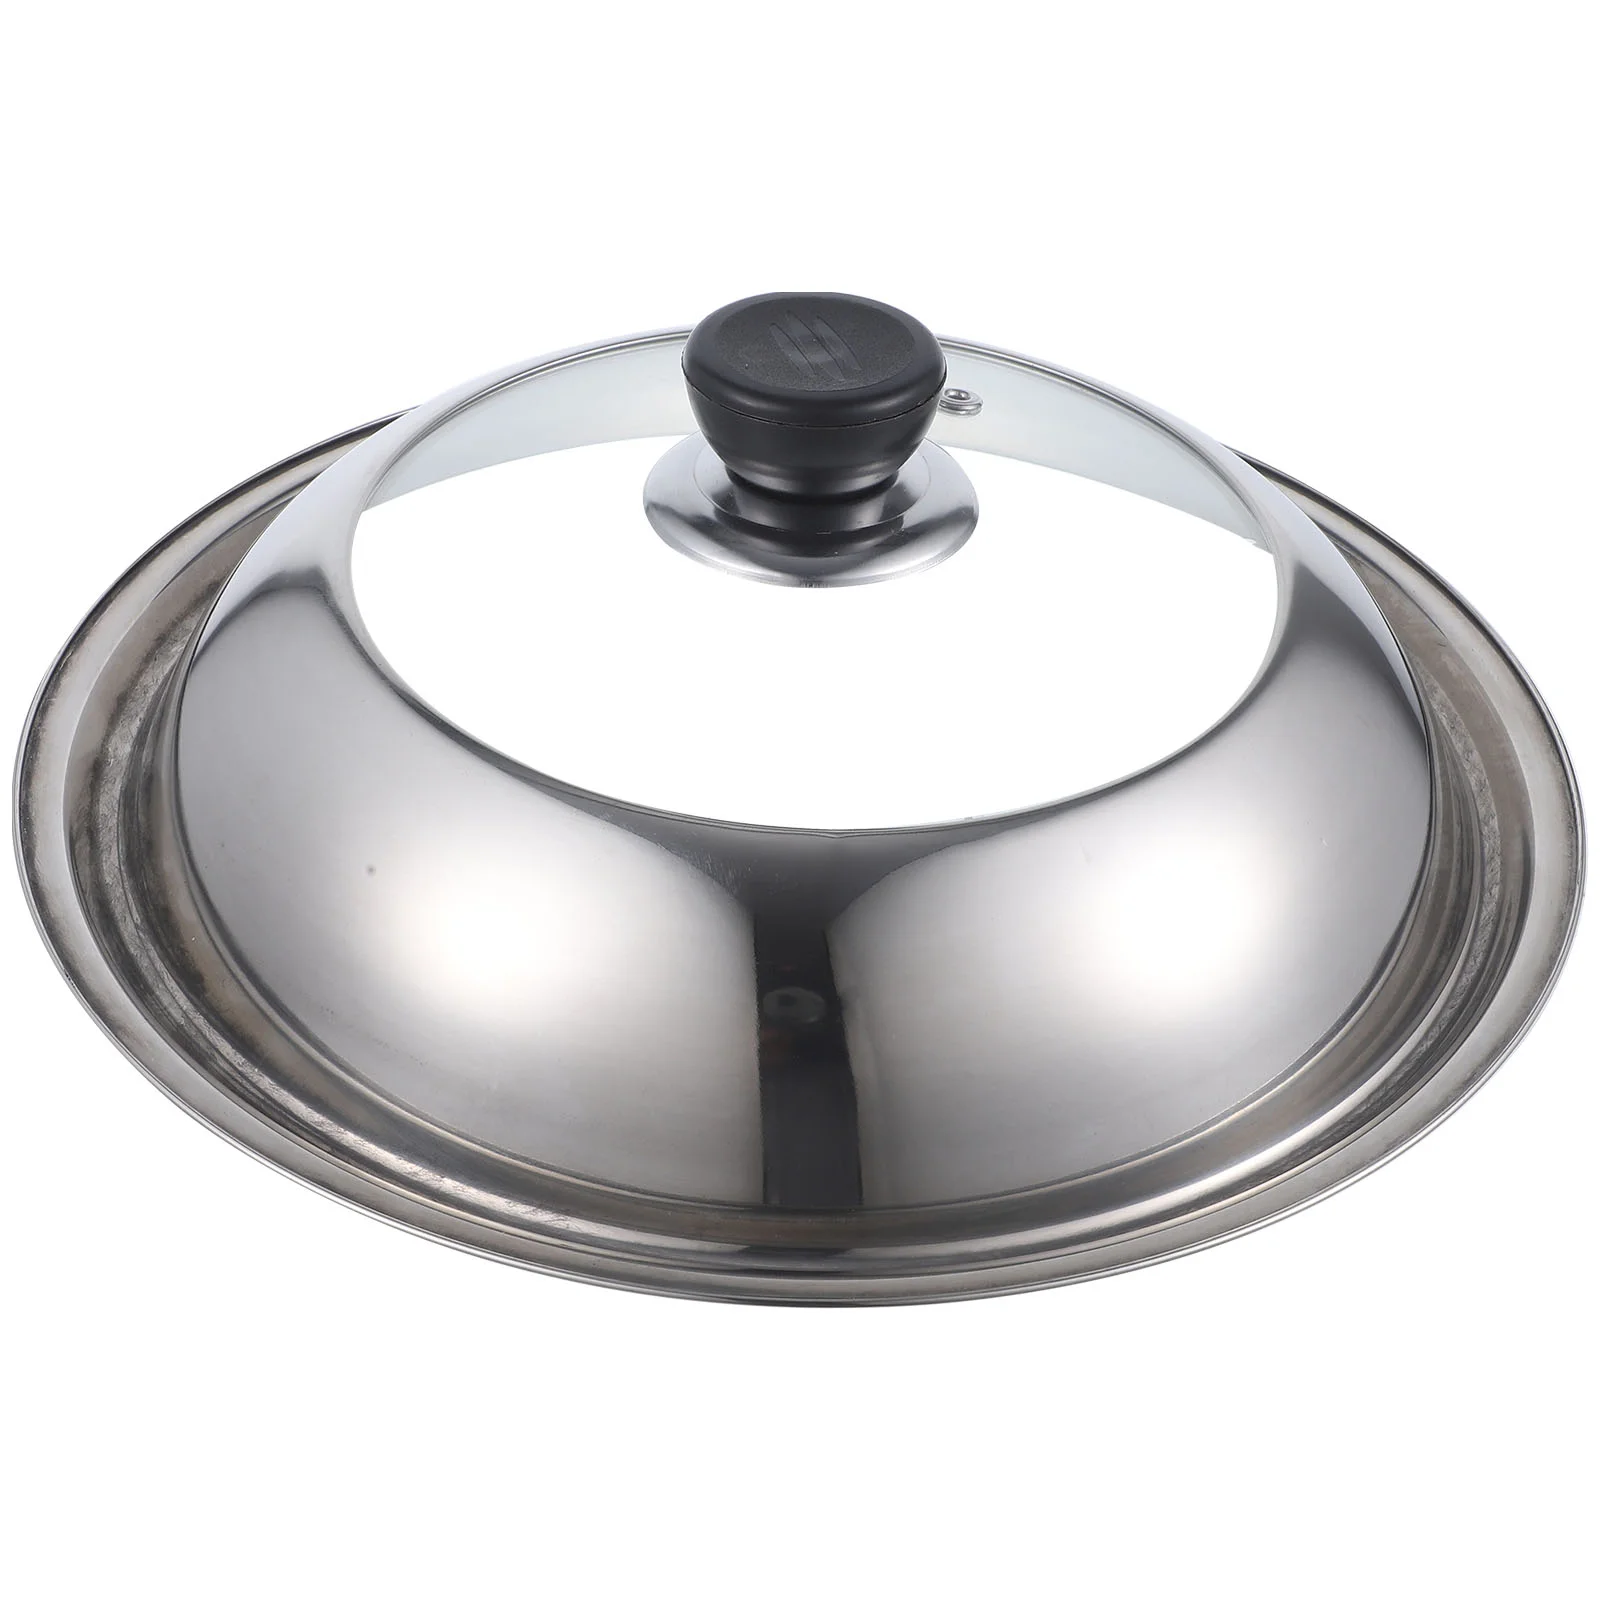 

Lid Cover Pot Pan Cooking Stainless Steel Universal Lids Visible Replacement Frying Wok Skillet Covers Food Cookware Pots Anti